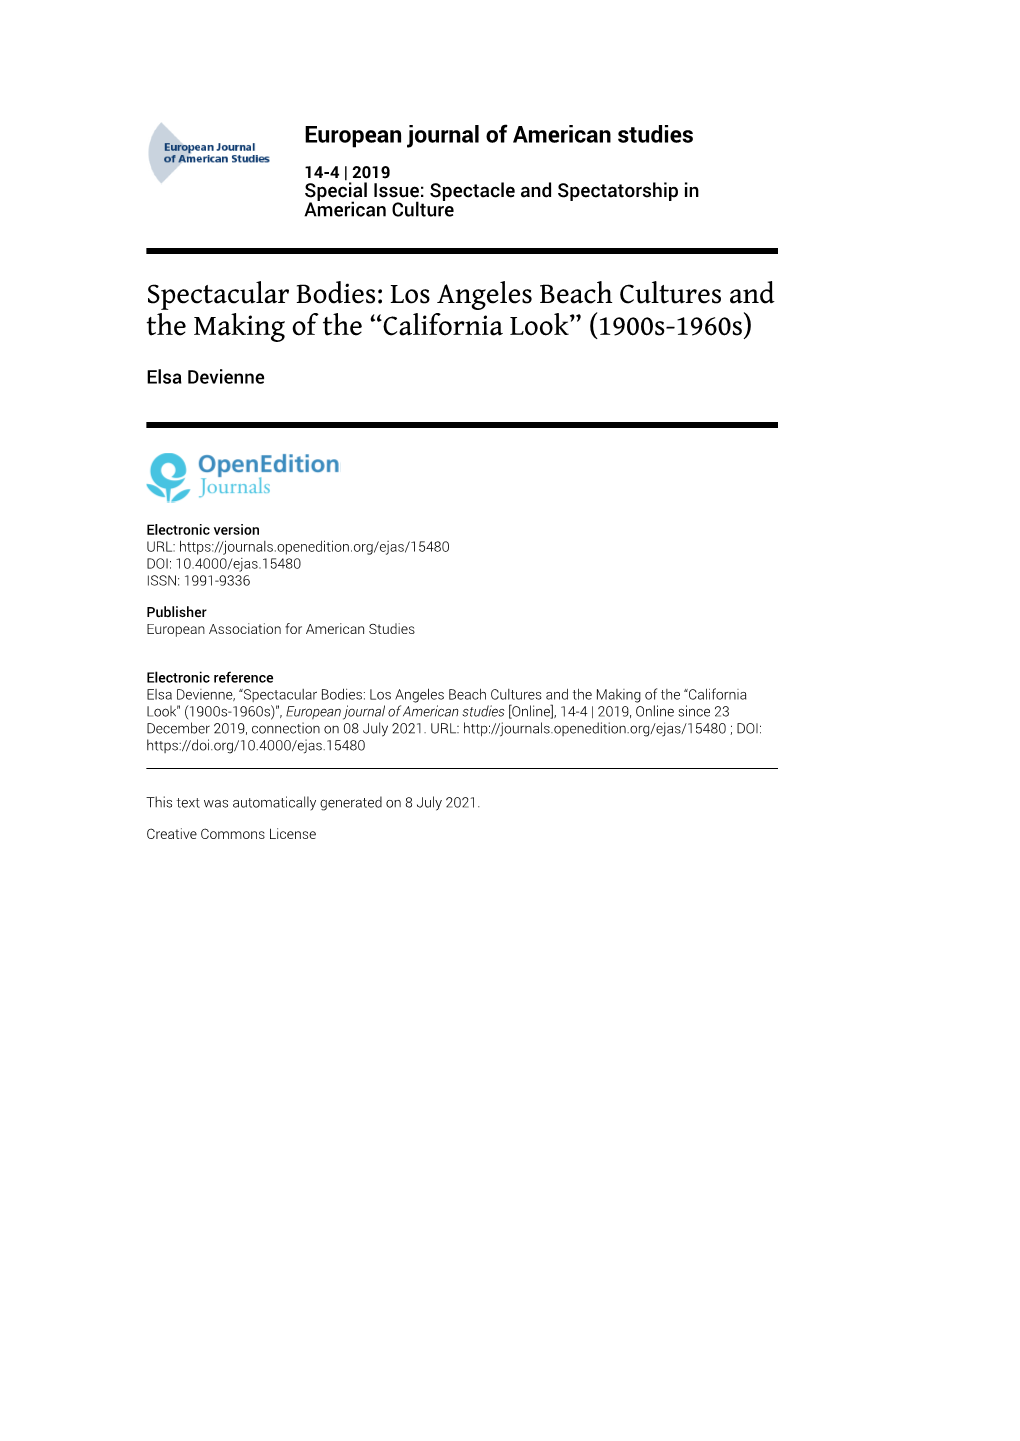 European Journal of American Studies, 14-4 | 2019 Spectacular Bodies: Los Angeles Beach Cultures and the Making of the “Califor